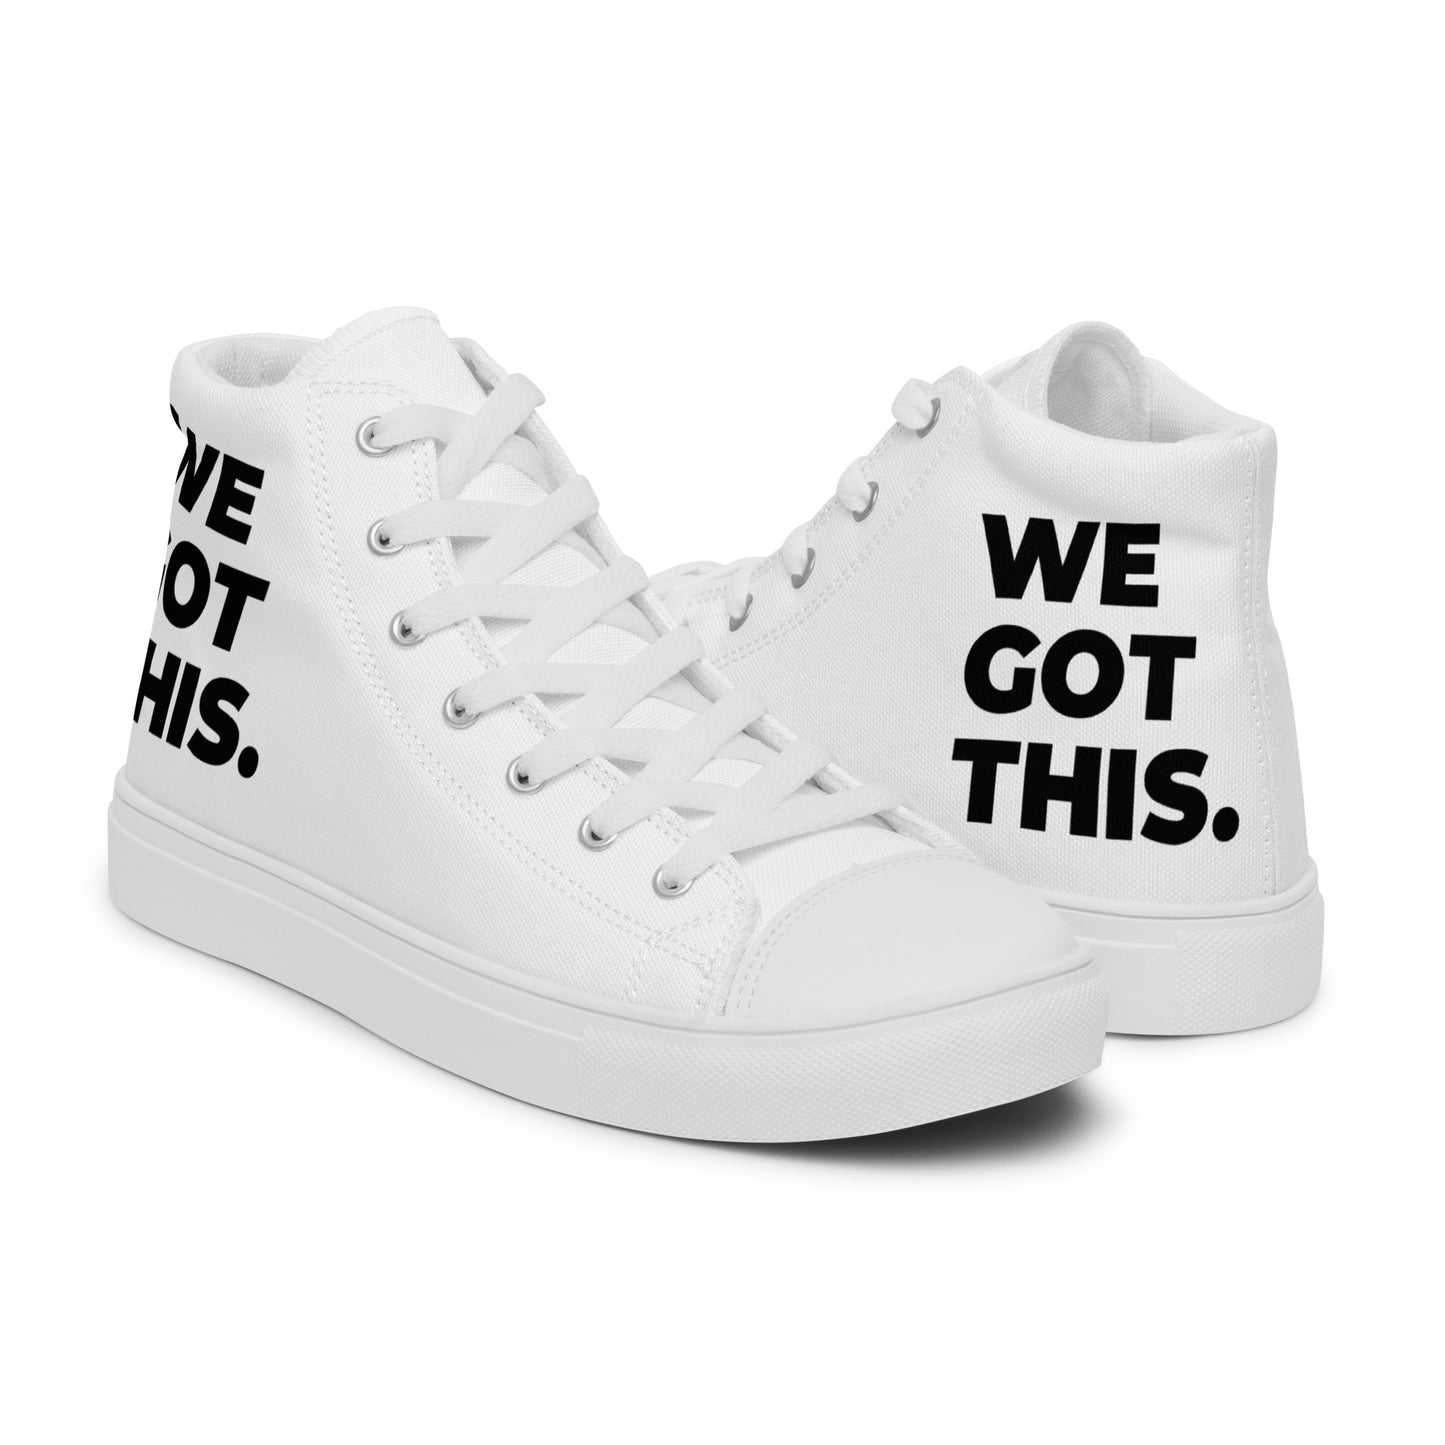 Women’s High Top Canvas Shoes - White